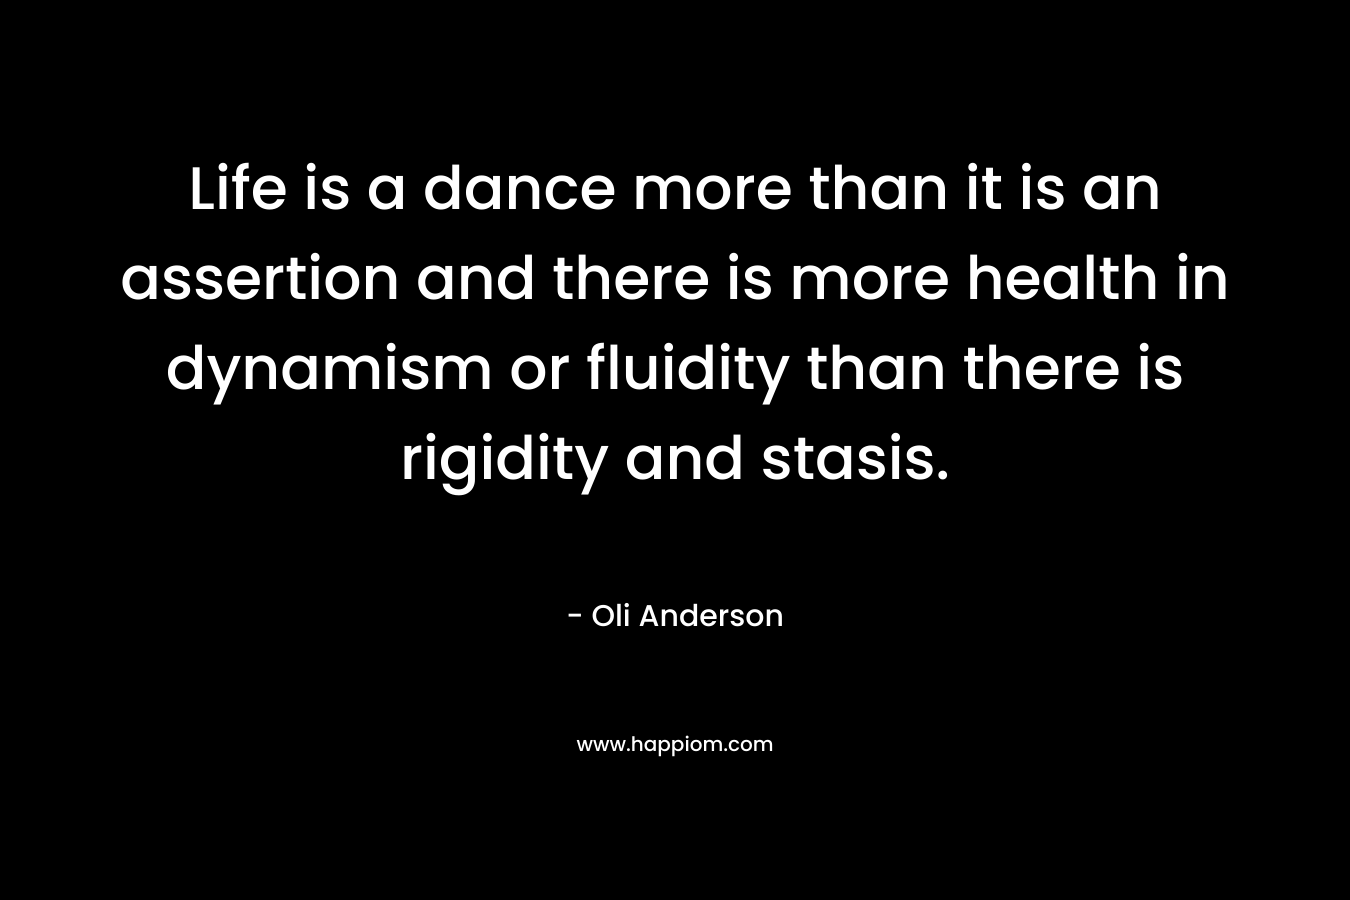 Life is a dance more than it is an assertion and there is more health in dynamism or fluidity than there is rigidity and stasis. – Oli Anderson